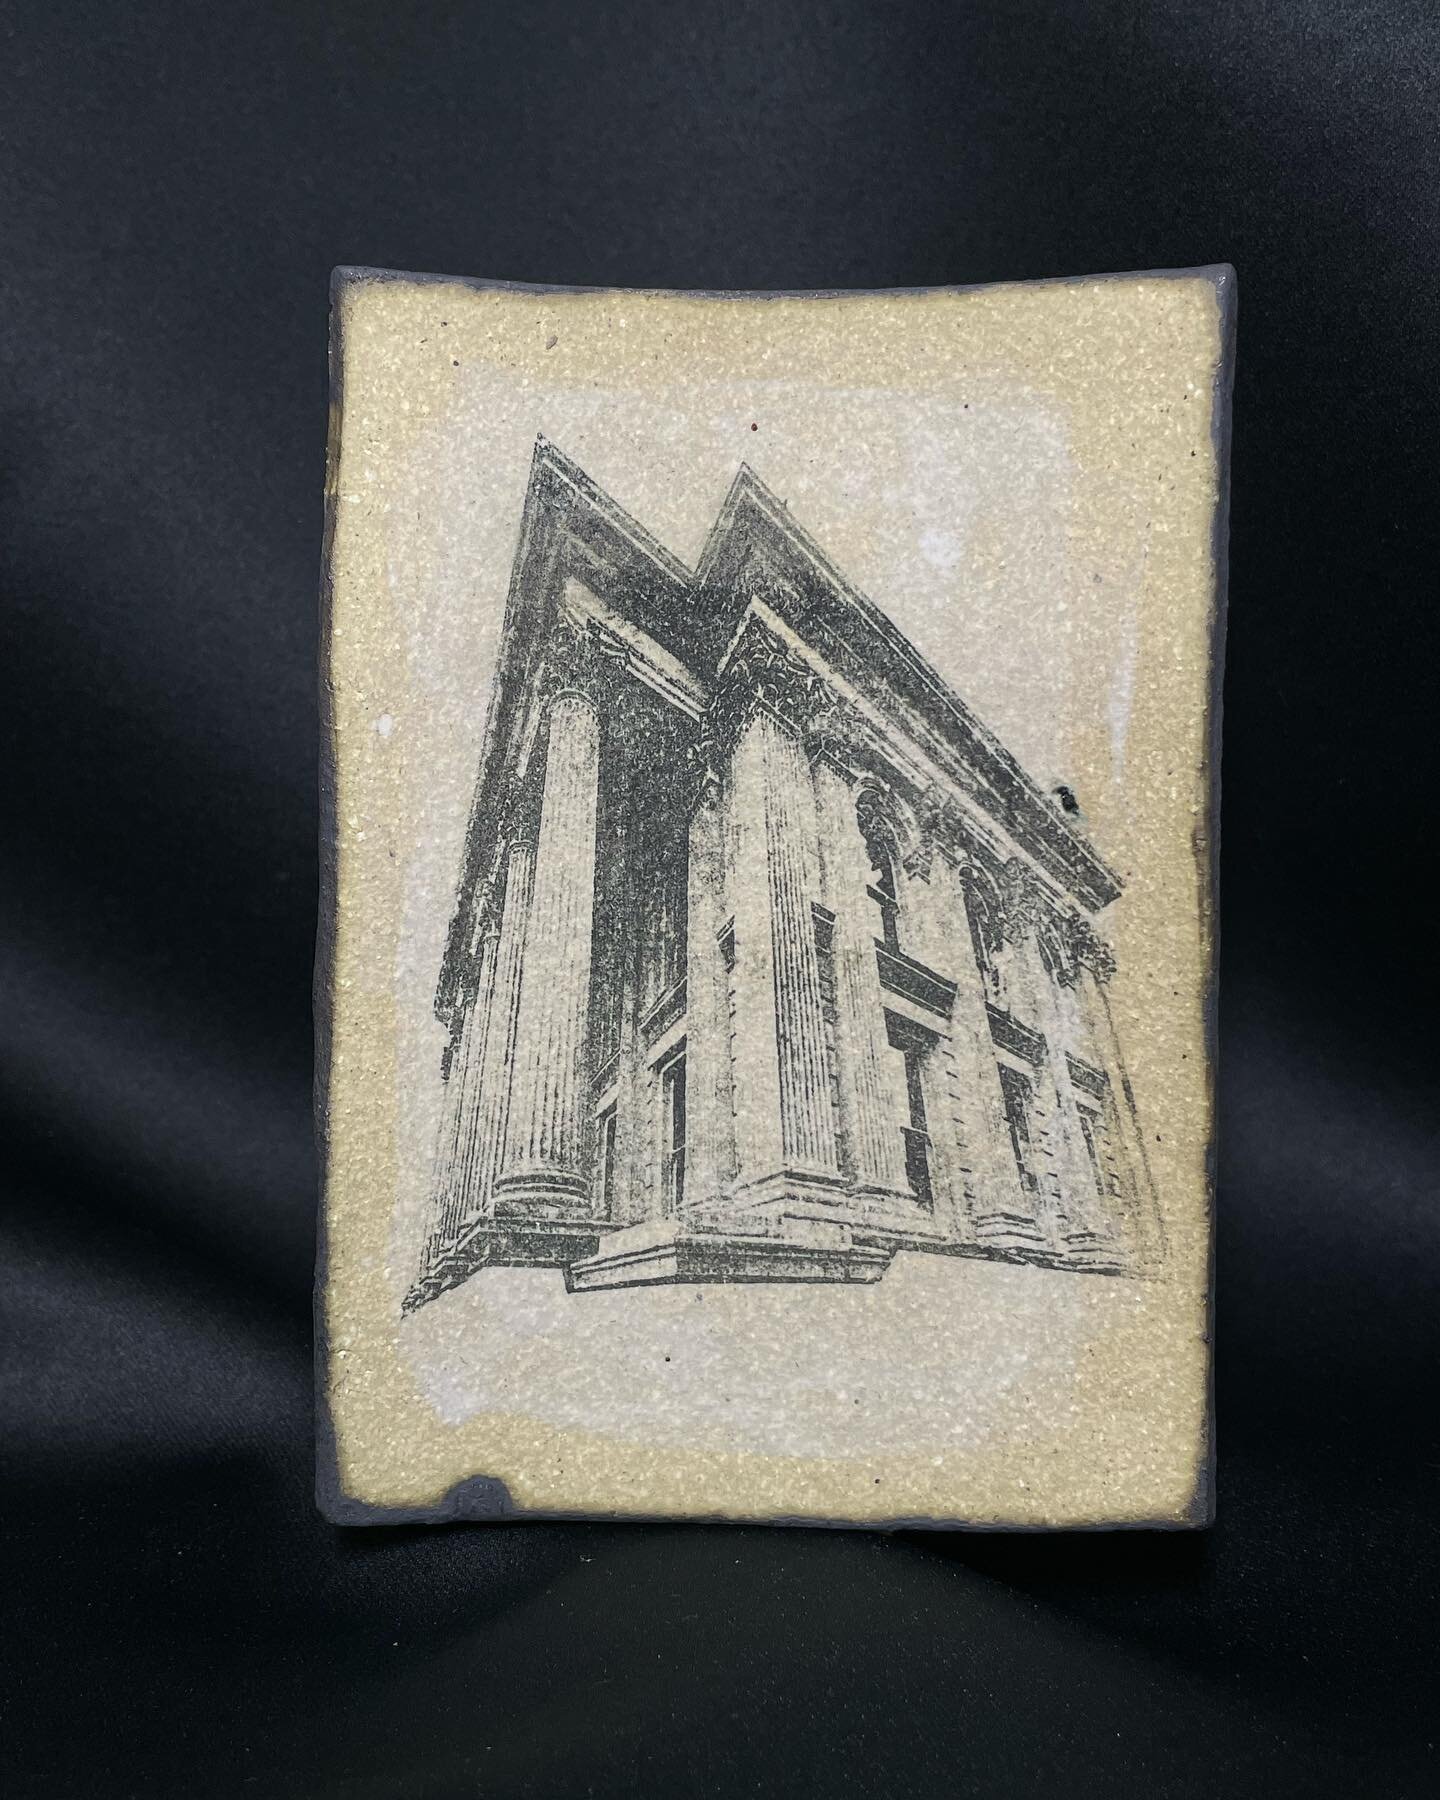 Oamaru postcards.
White grog clay with a porcelain slip and copper oxide wash edge, with own original photo using a lithographic printmaking technique.
Approx 14x19cm
Available @craftedoamaru or DM

Forrester Gallery
Town Hall
entrance to Basilica